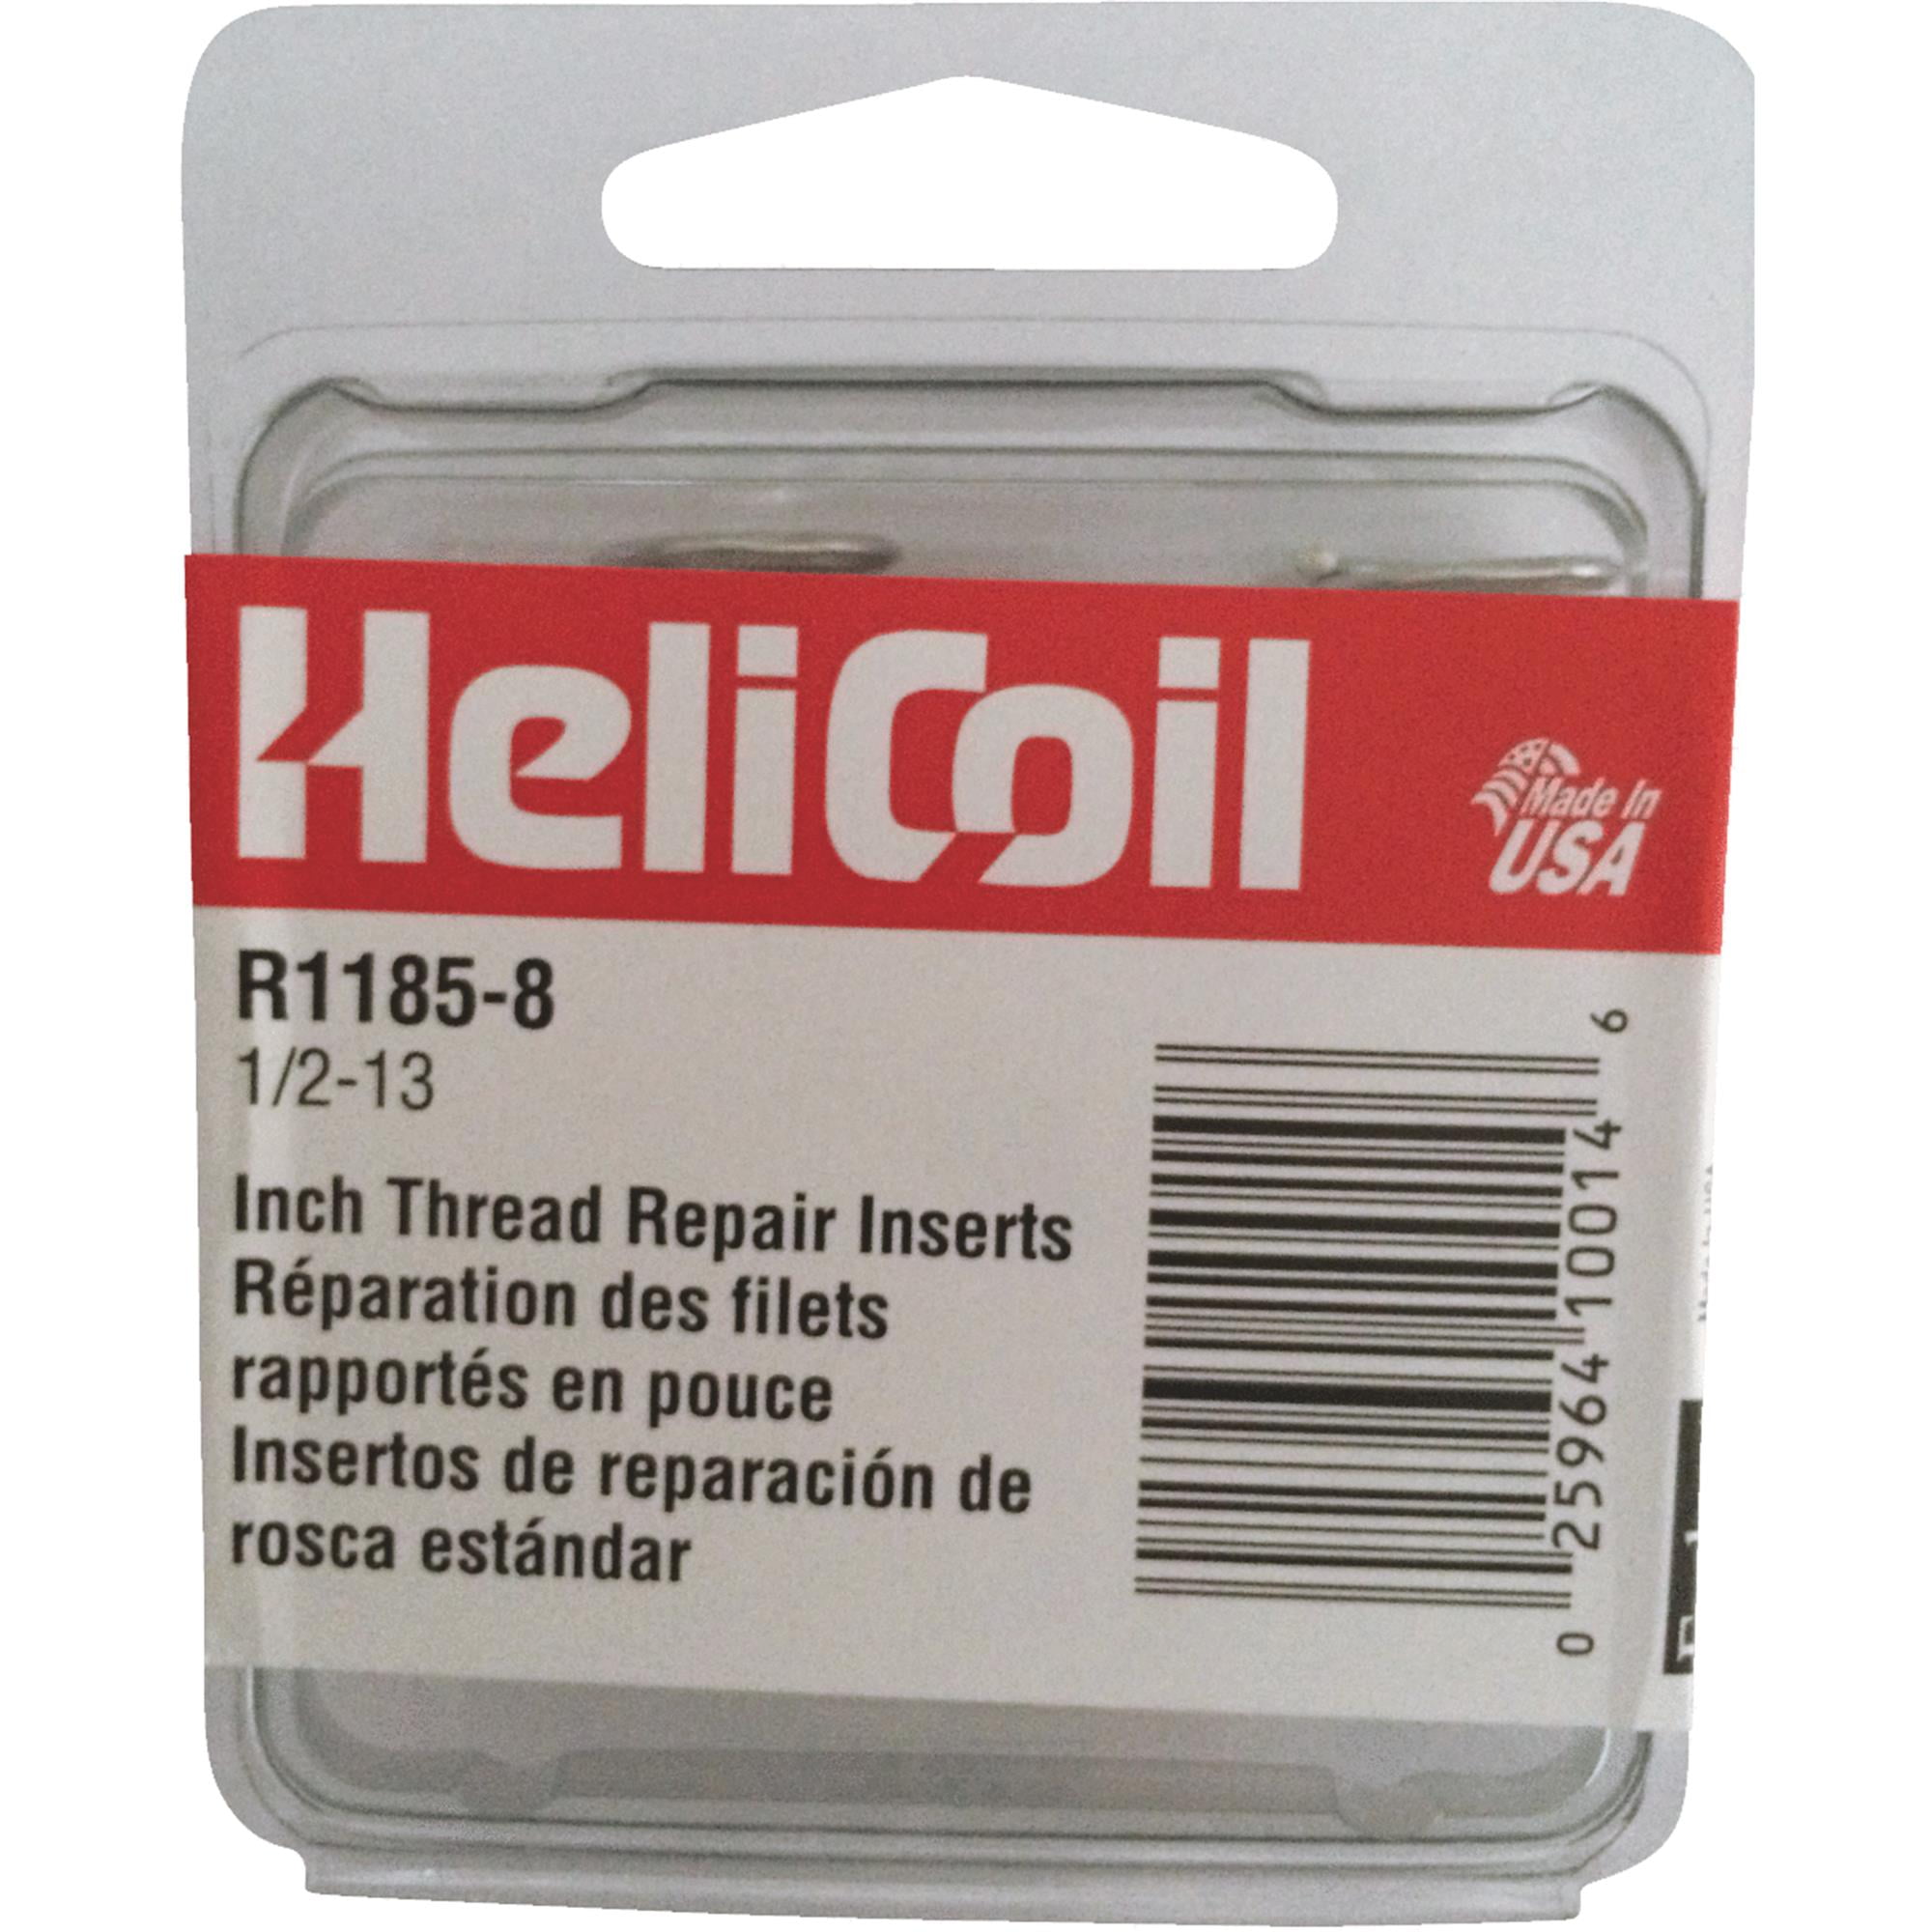 Details about   3/8-16 HELICOIL INSERT R1185-6 PACK OF 10 